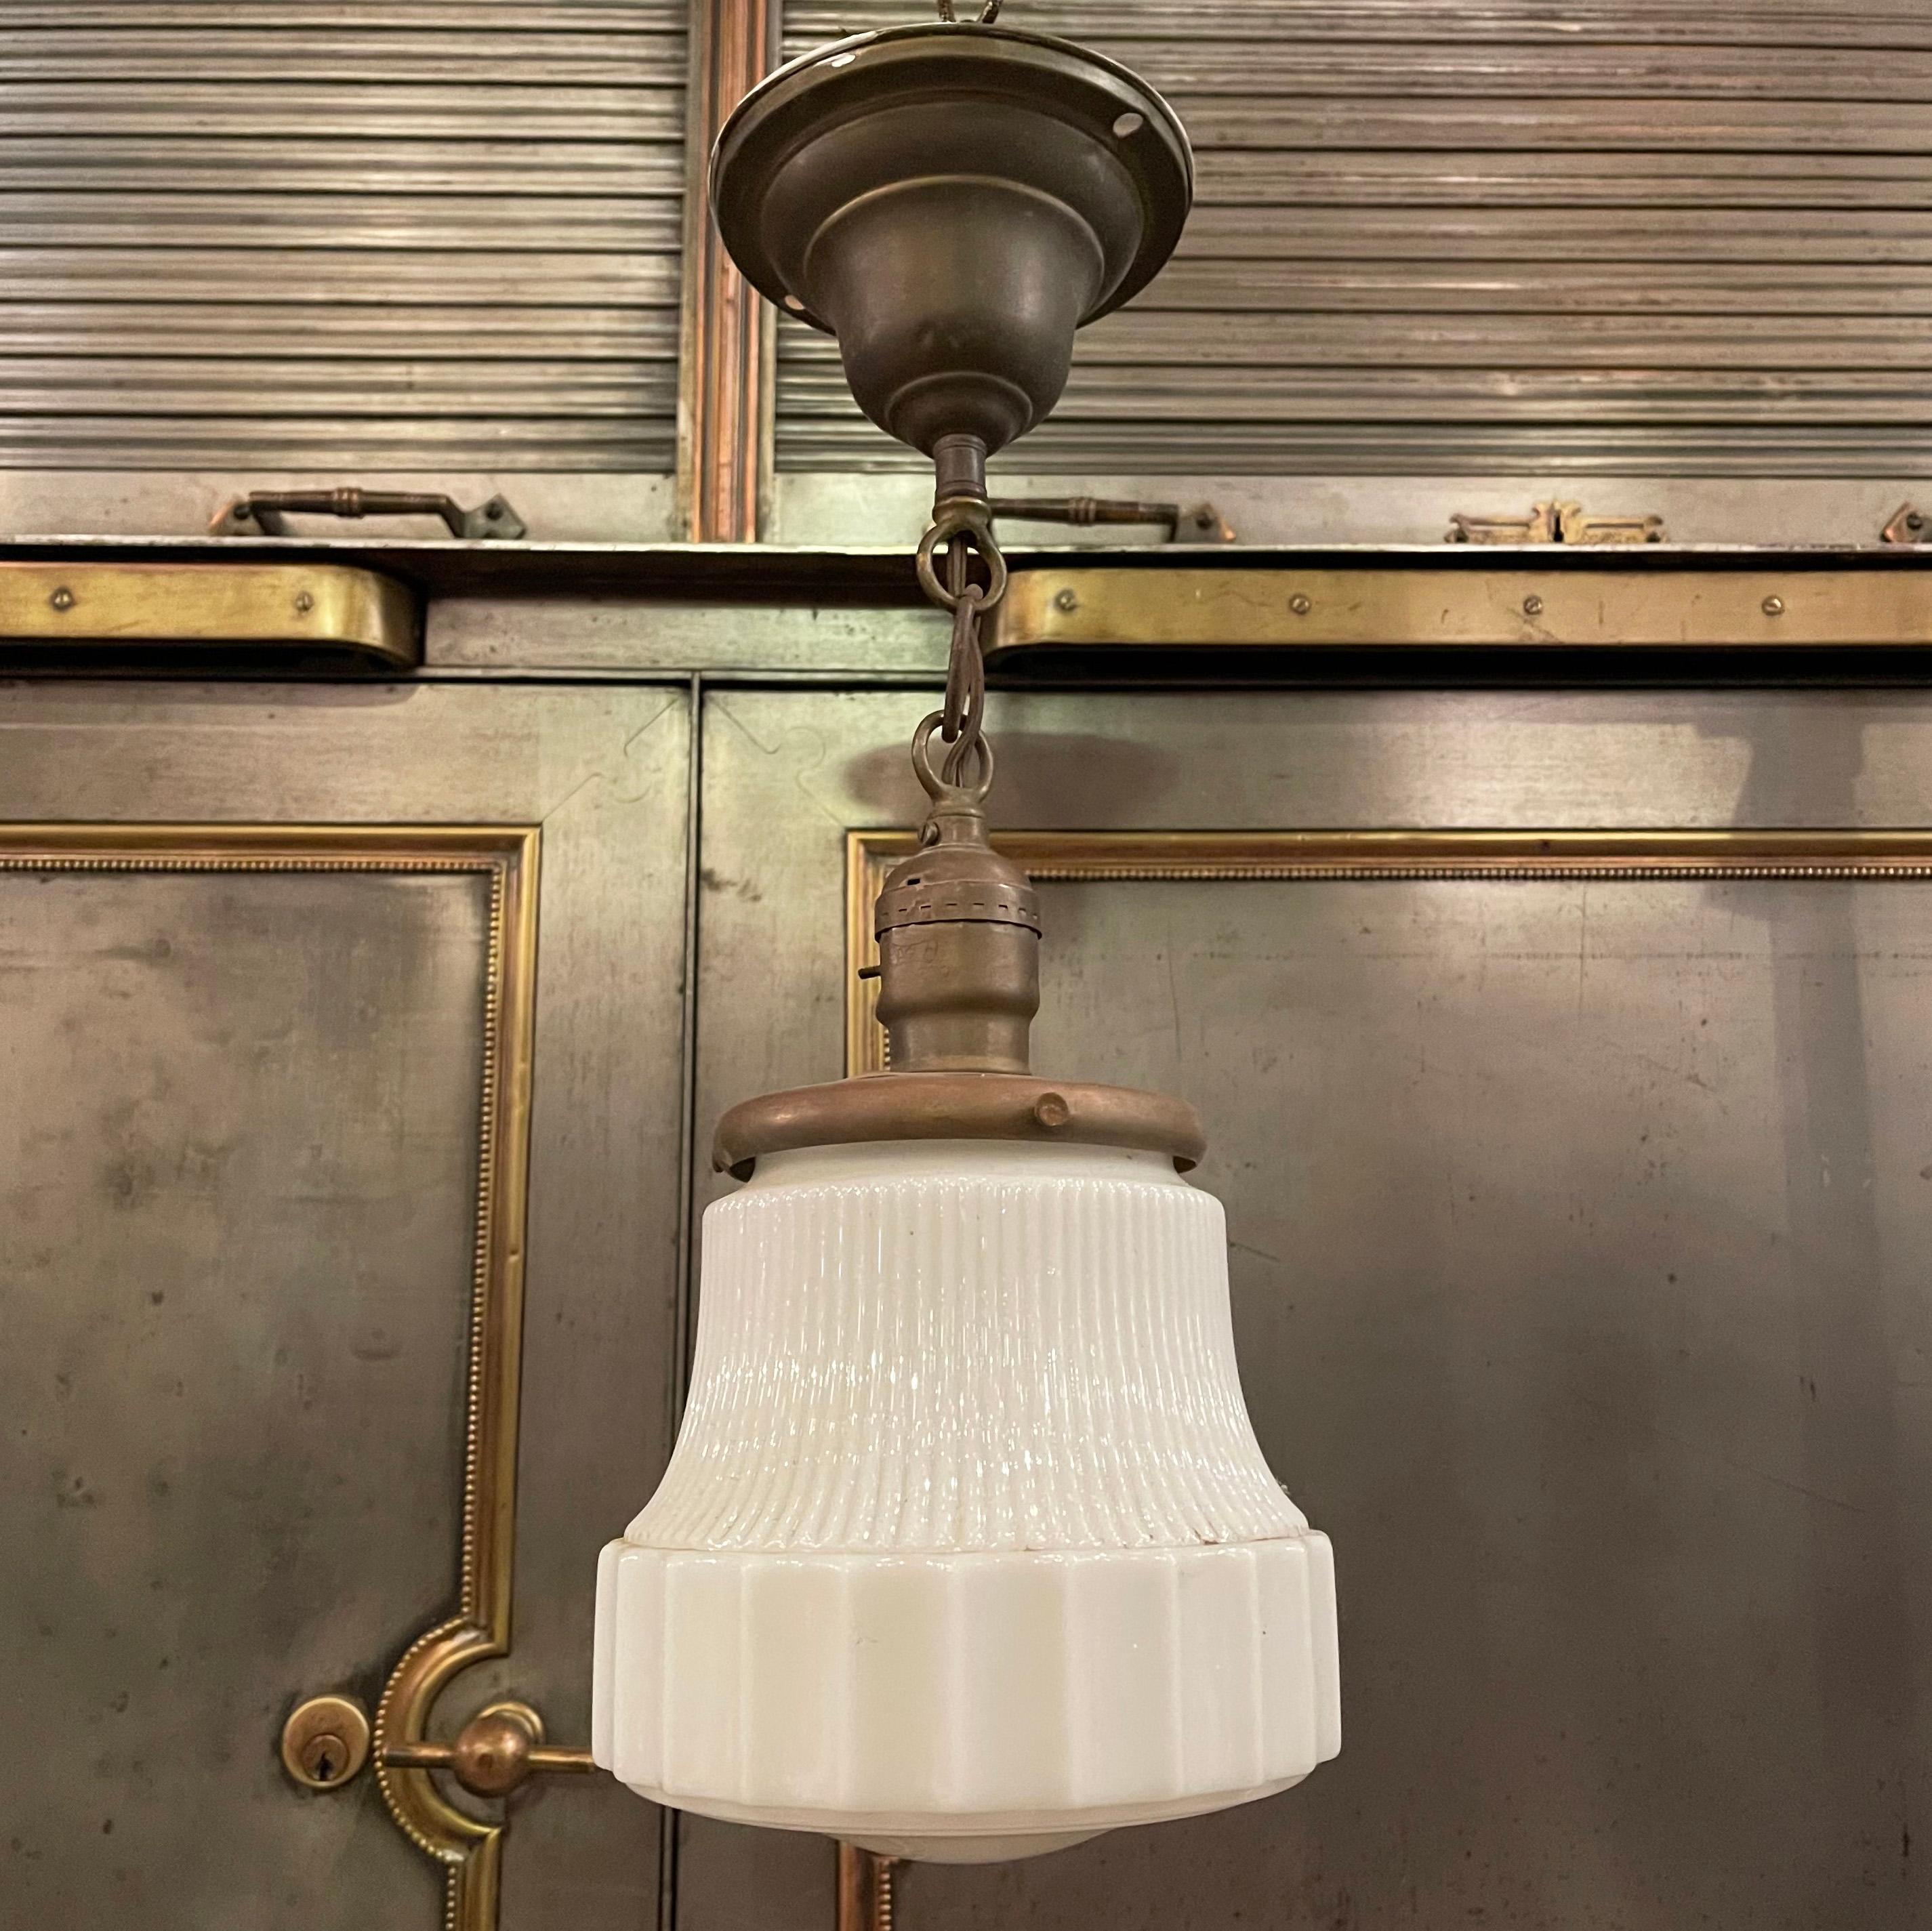 Art Deco pendant or semi-flushmount light with ribbed, milk glass shade on a brass fitter, chain and canopy. The pendant hangs at an overall height of 15 inches.